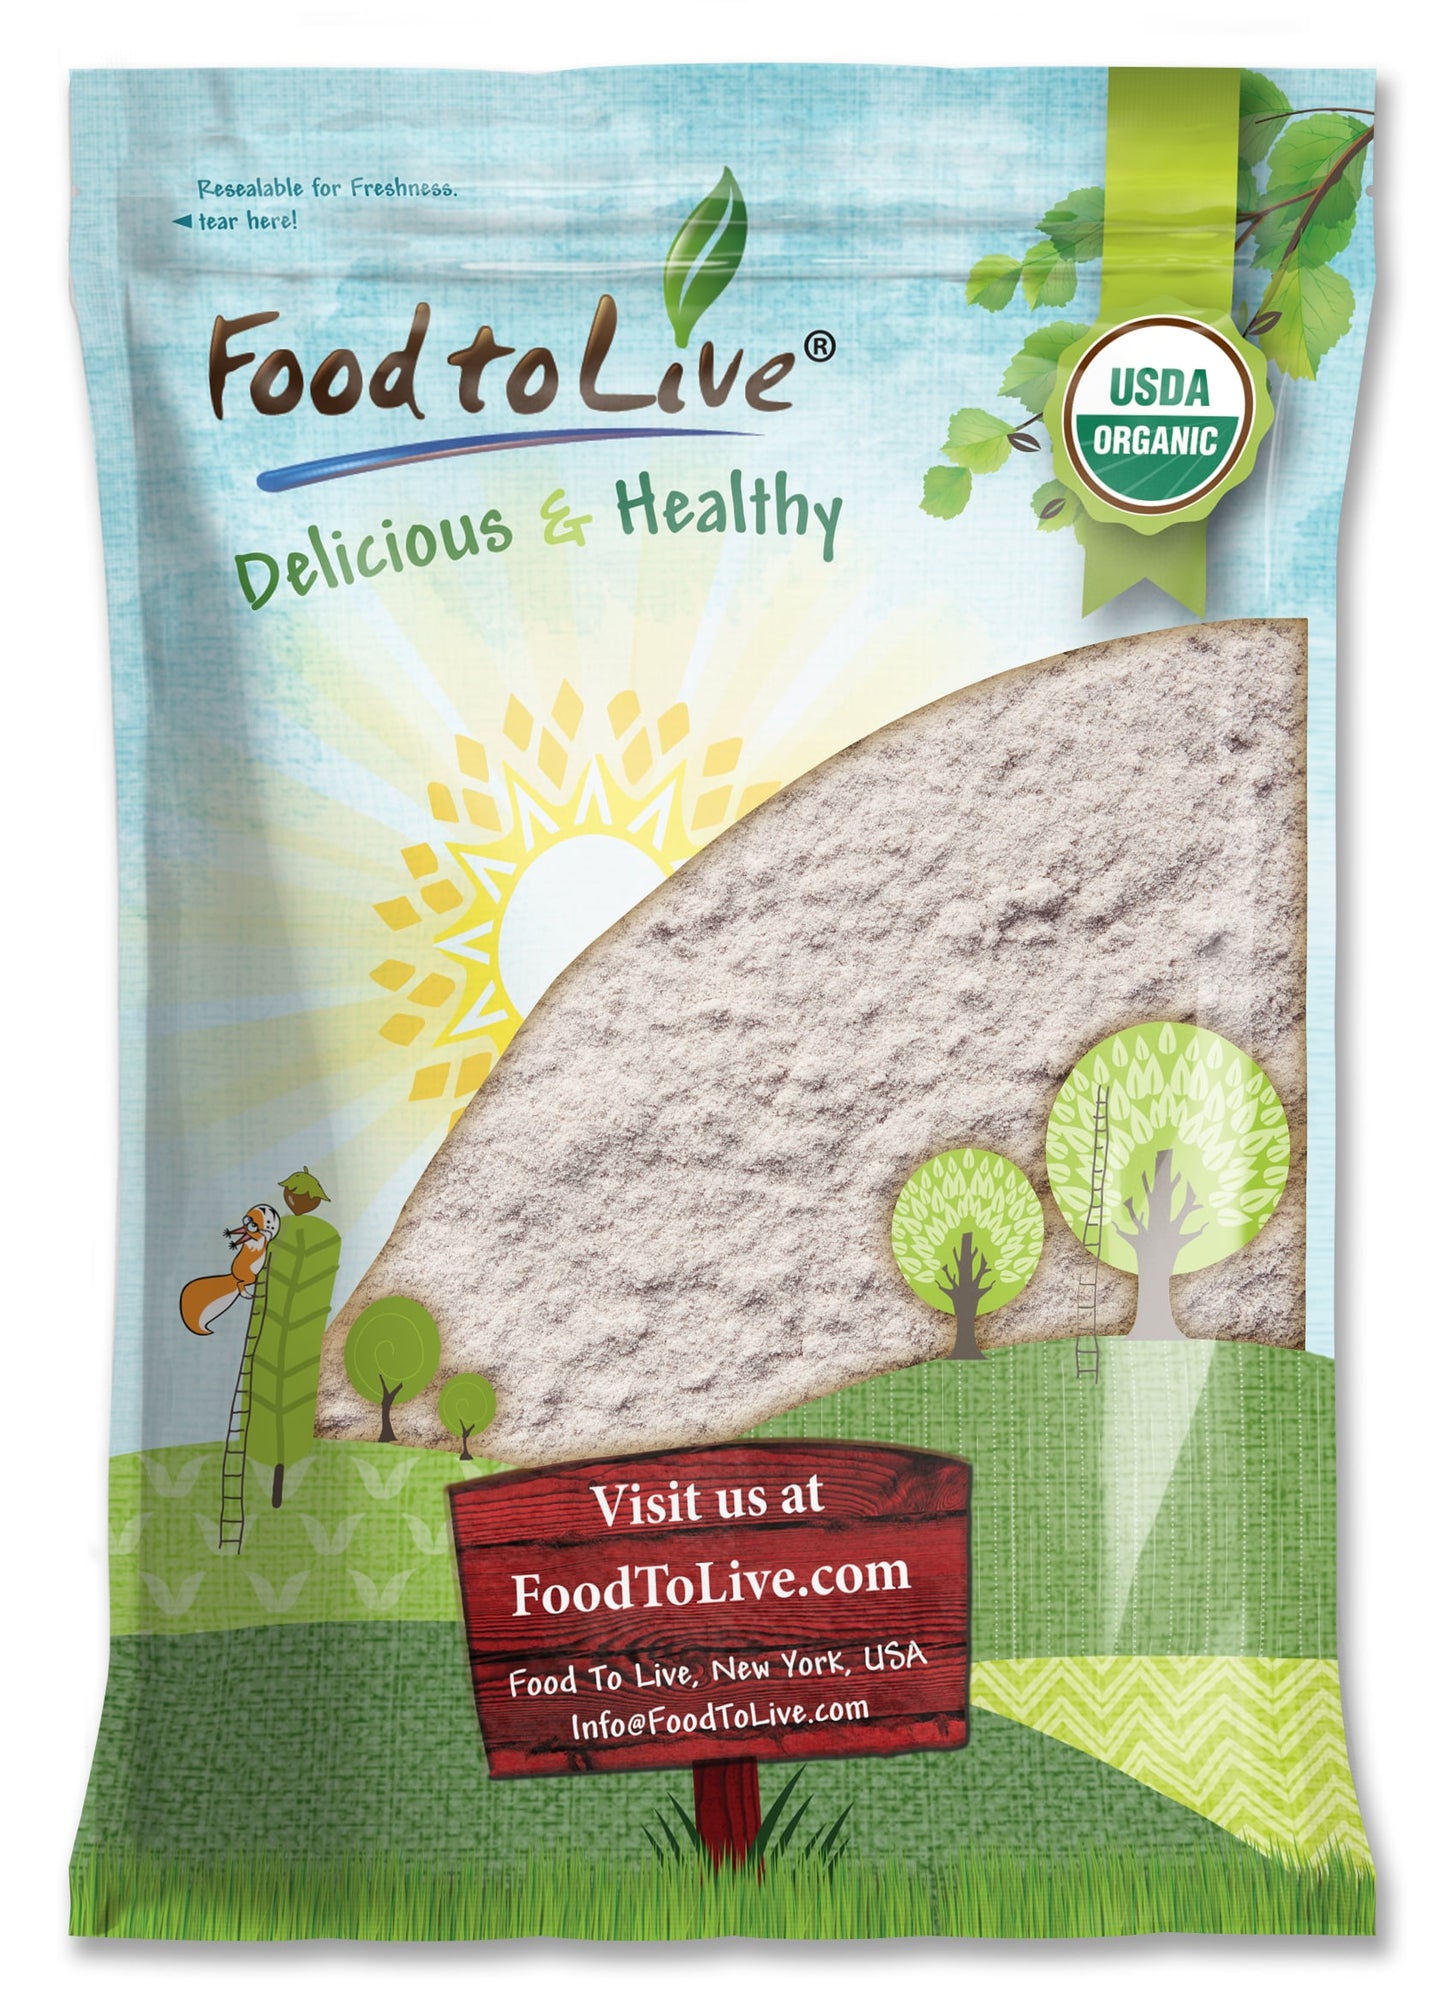 Certified Gluten Free Organic Brown Rice Flour – Non-GMO Whole Grain Flour, Fine Meal, Vegan, Bulk. Rich in Fiber. Great for Cooking, Baking, and as Thickener. Made in USA